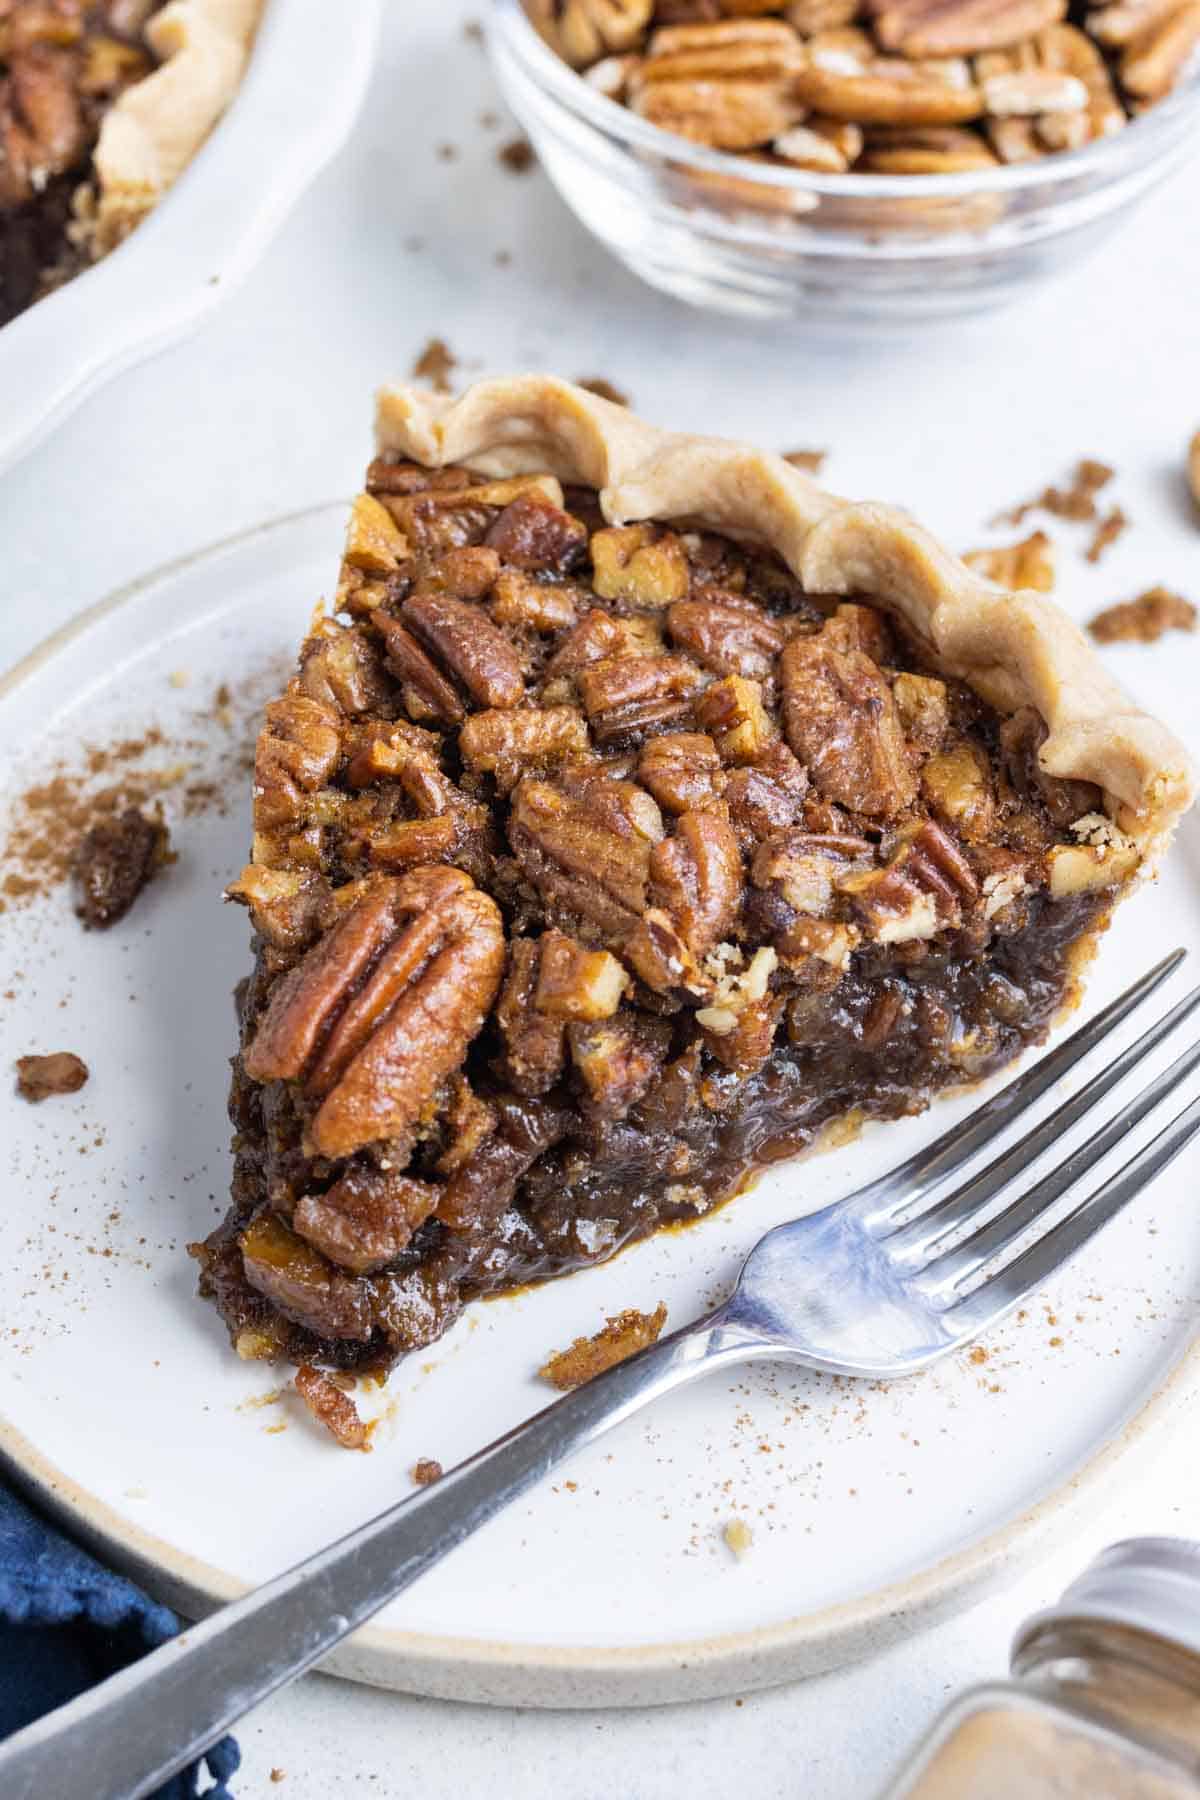 A piece of pecan pie is shown on a plate with raw pecans.